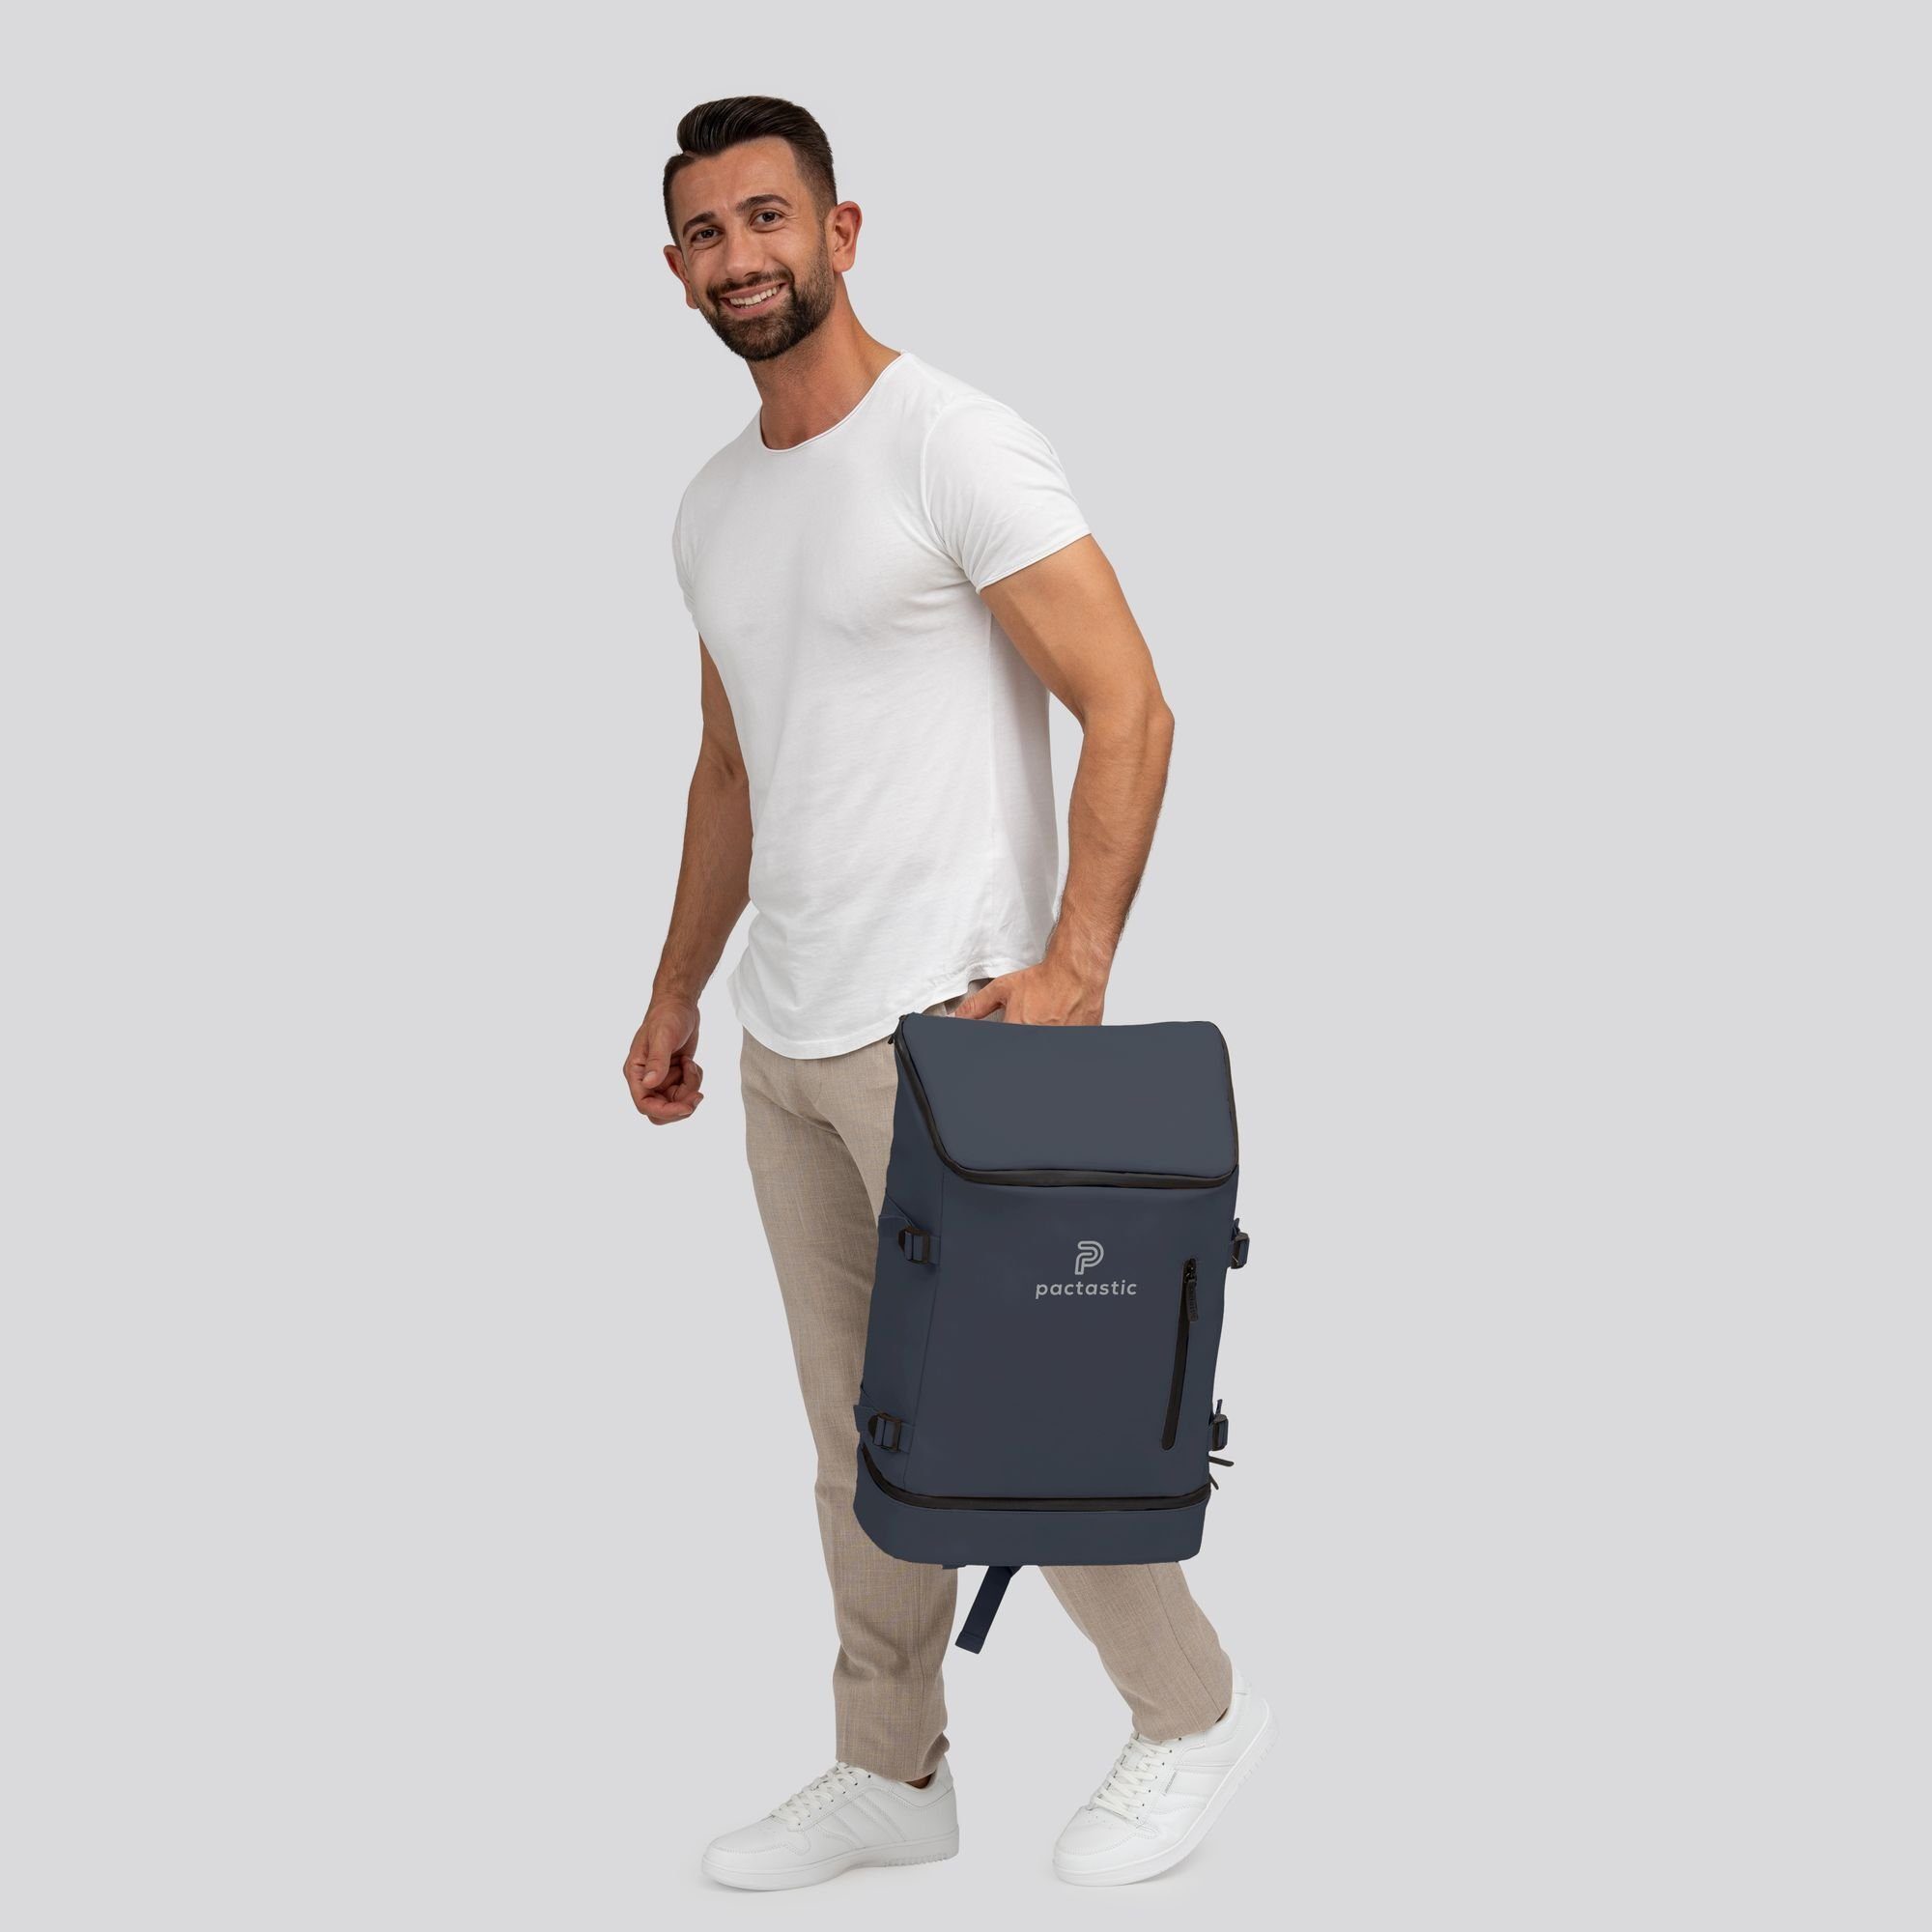 Pactastic Collection, Daypack Veganes blue Urban dark Tech-Material